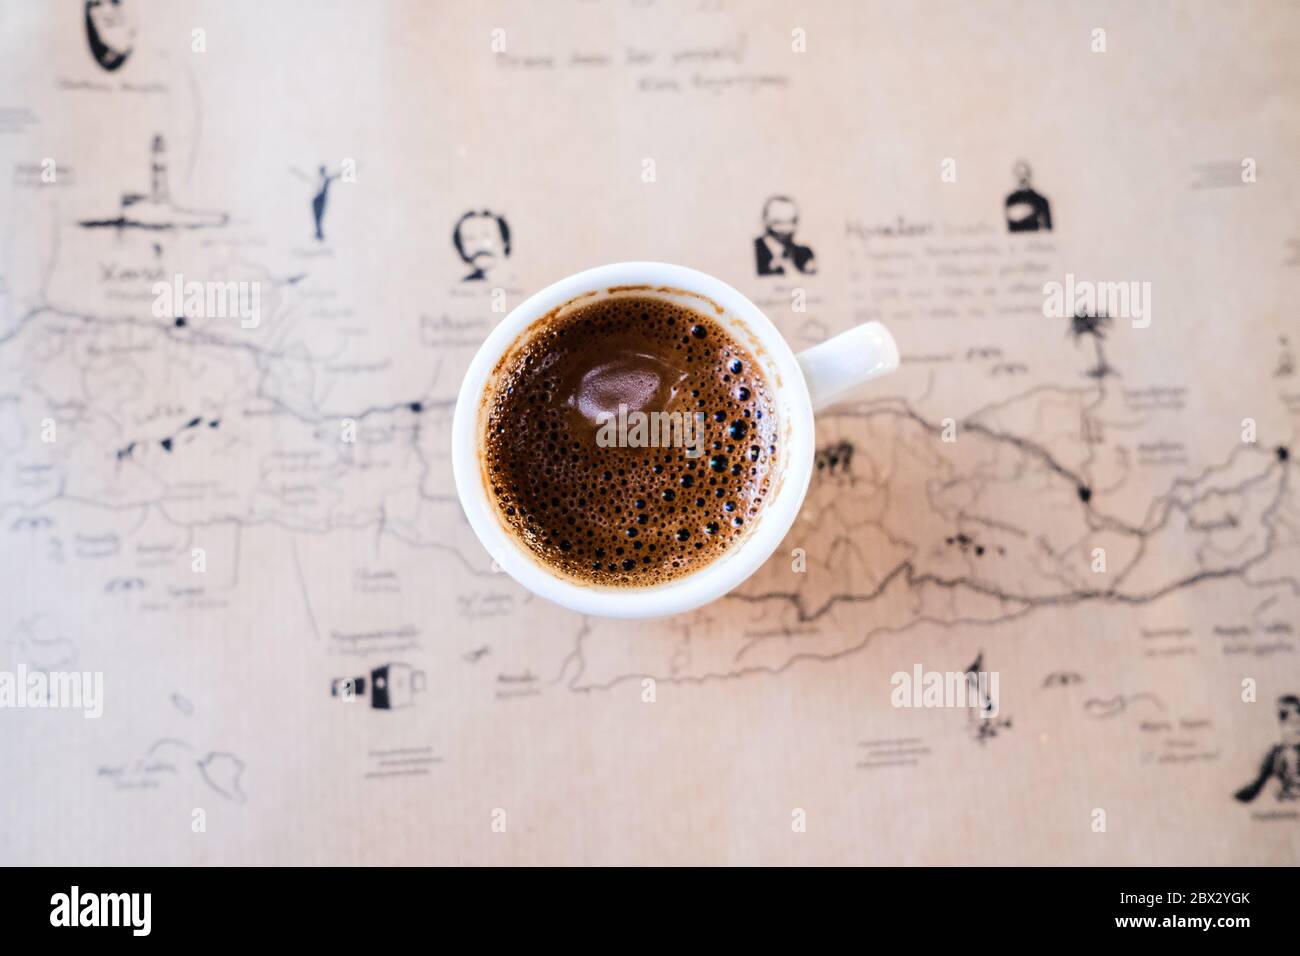 Top Down Image of Greek Coffee on a Table with a Map of Crete Stock Photo